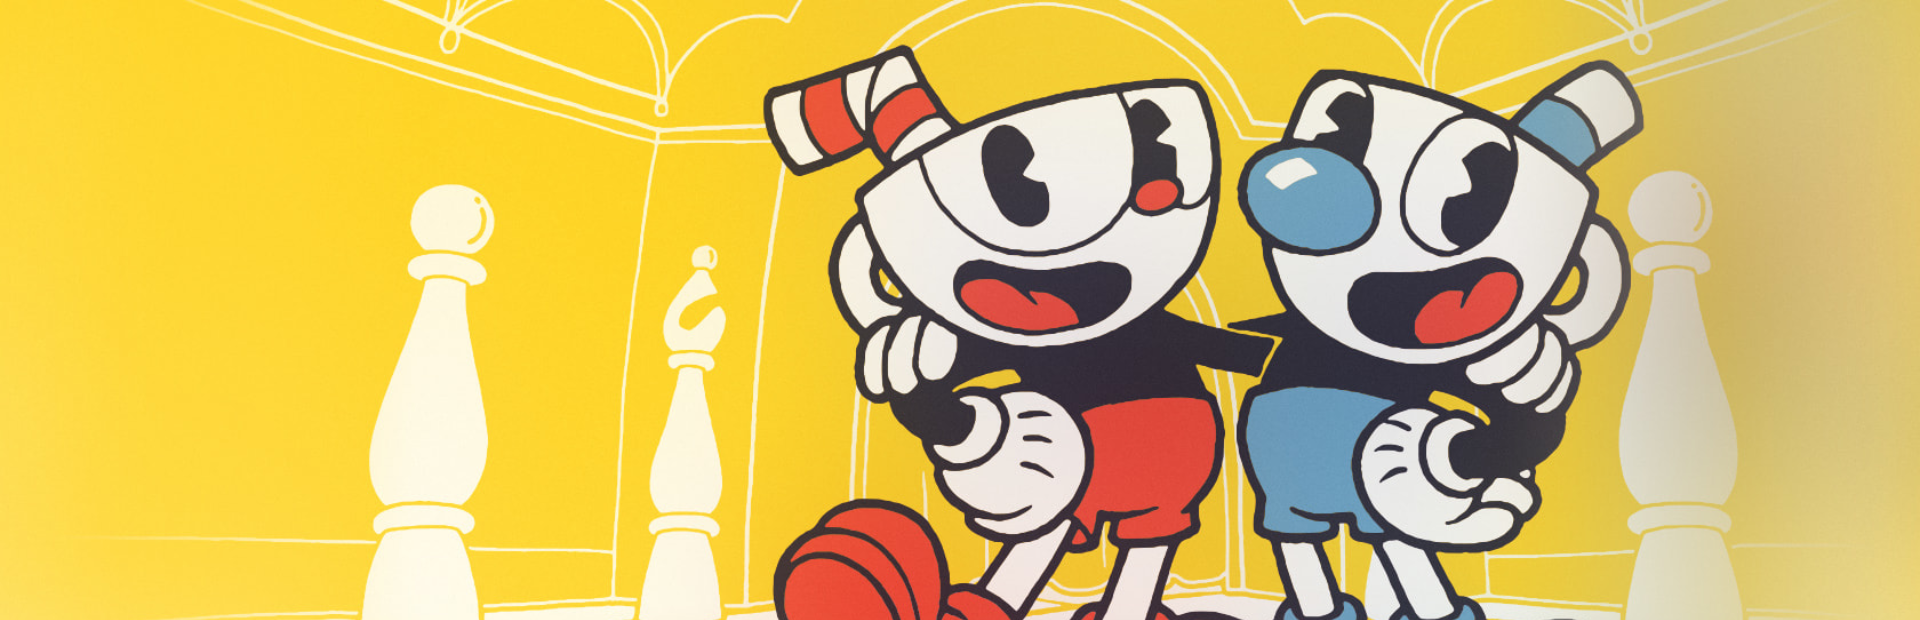 Hero for Cuphead by NickRick - SteamGridDB.